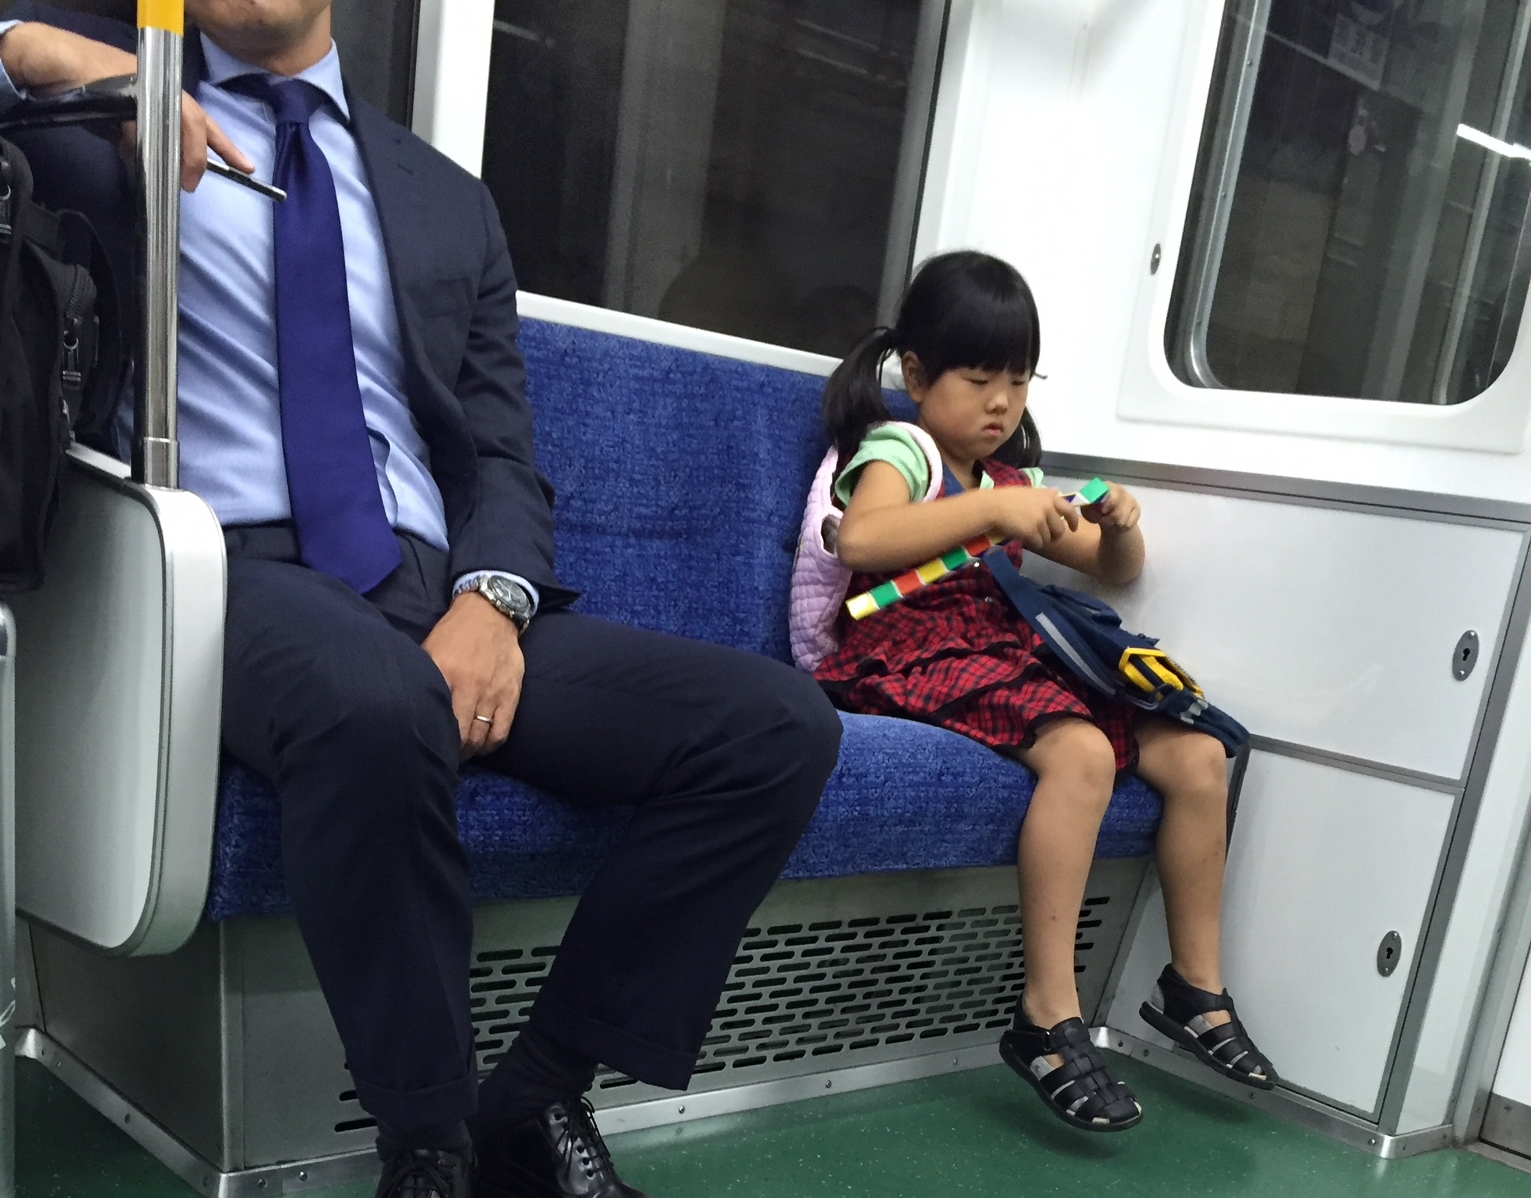 small child on subway plays with complicated toy